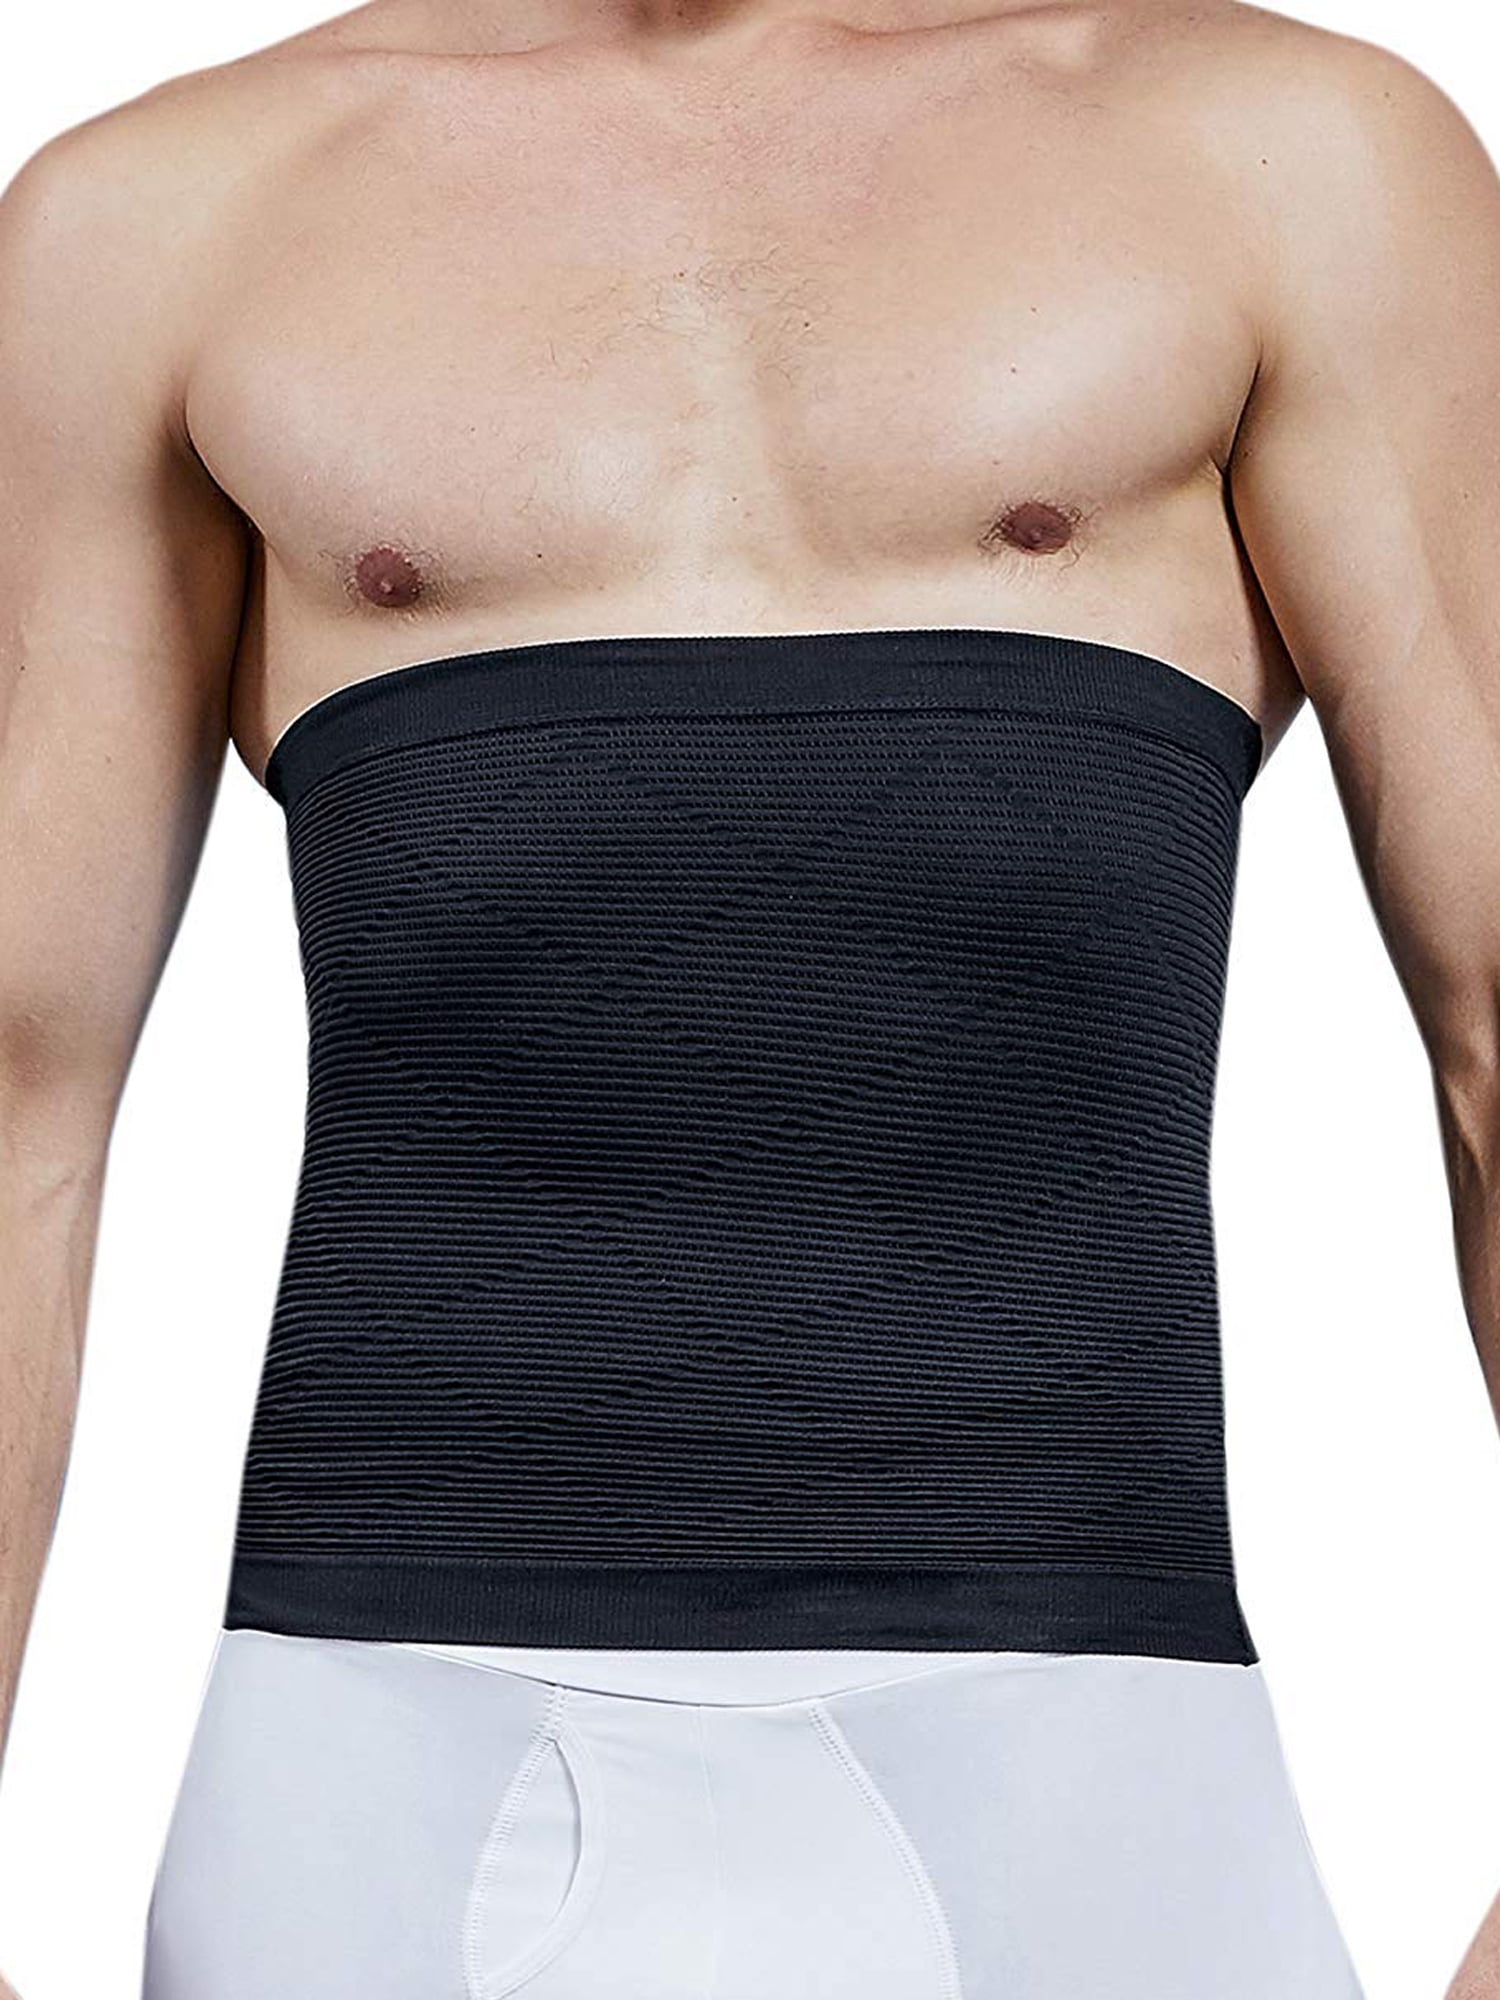 UK MENS TUMMY STOMACH FLATTENING PULL ME IN HOLD IN FIRM CONTROL BELT BAND NEW 